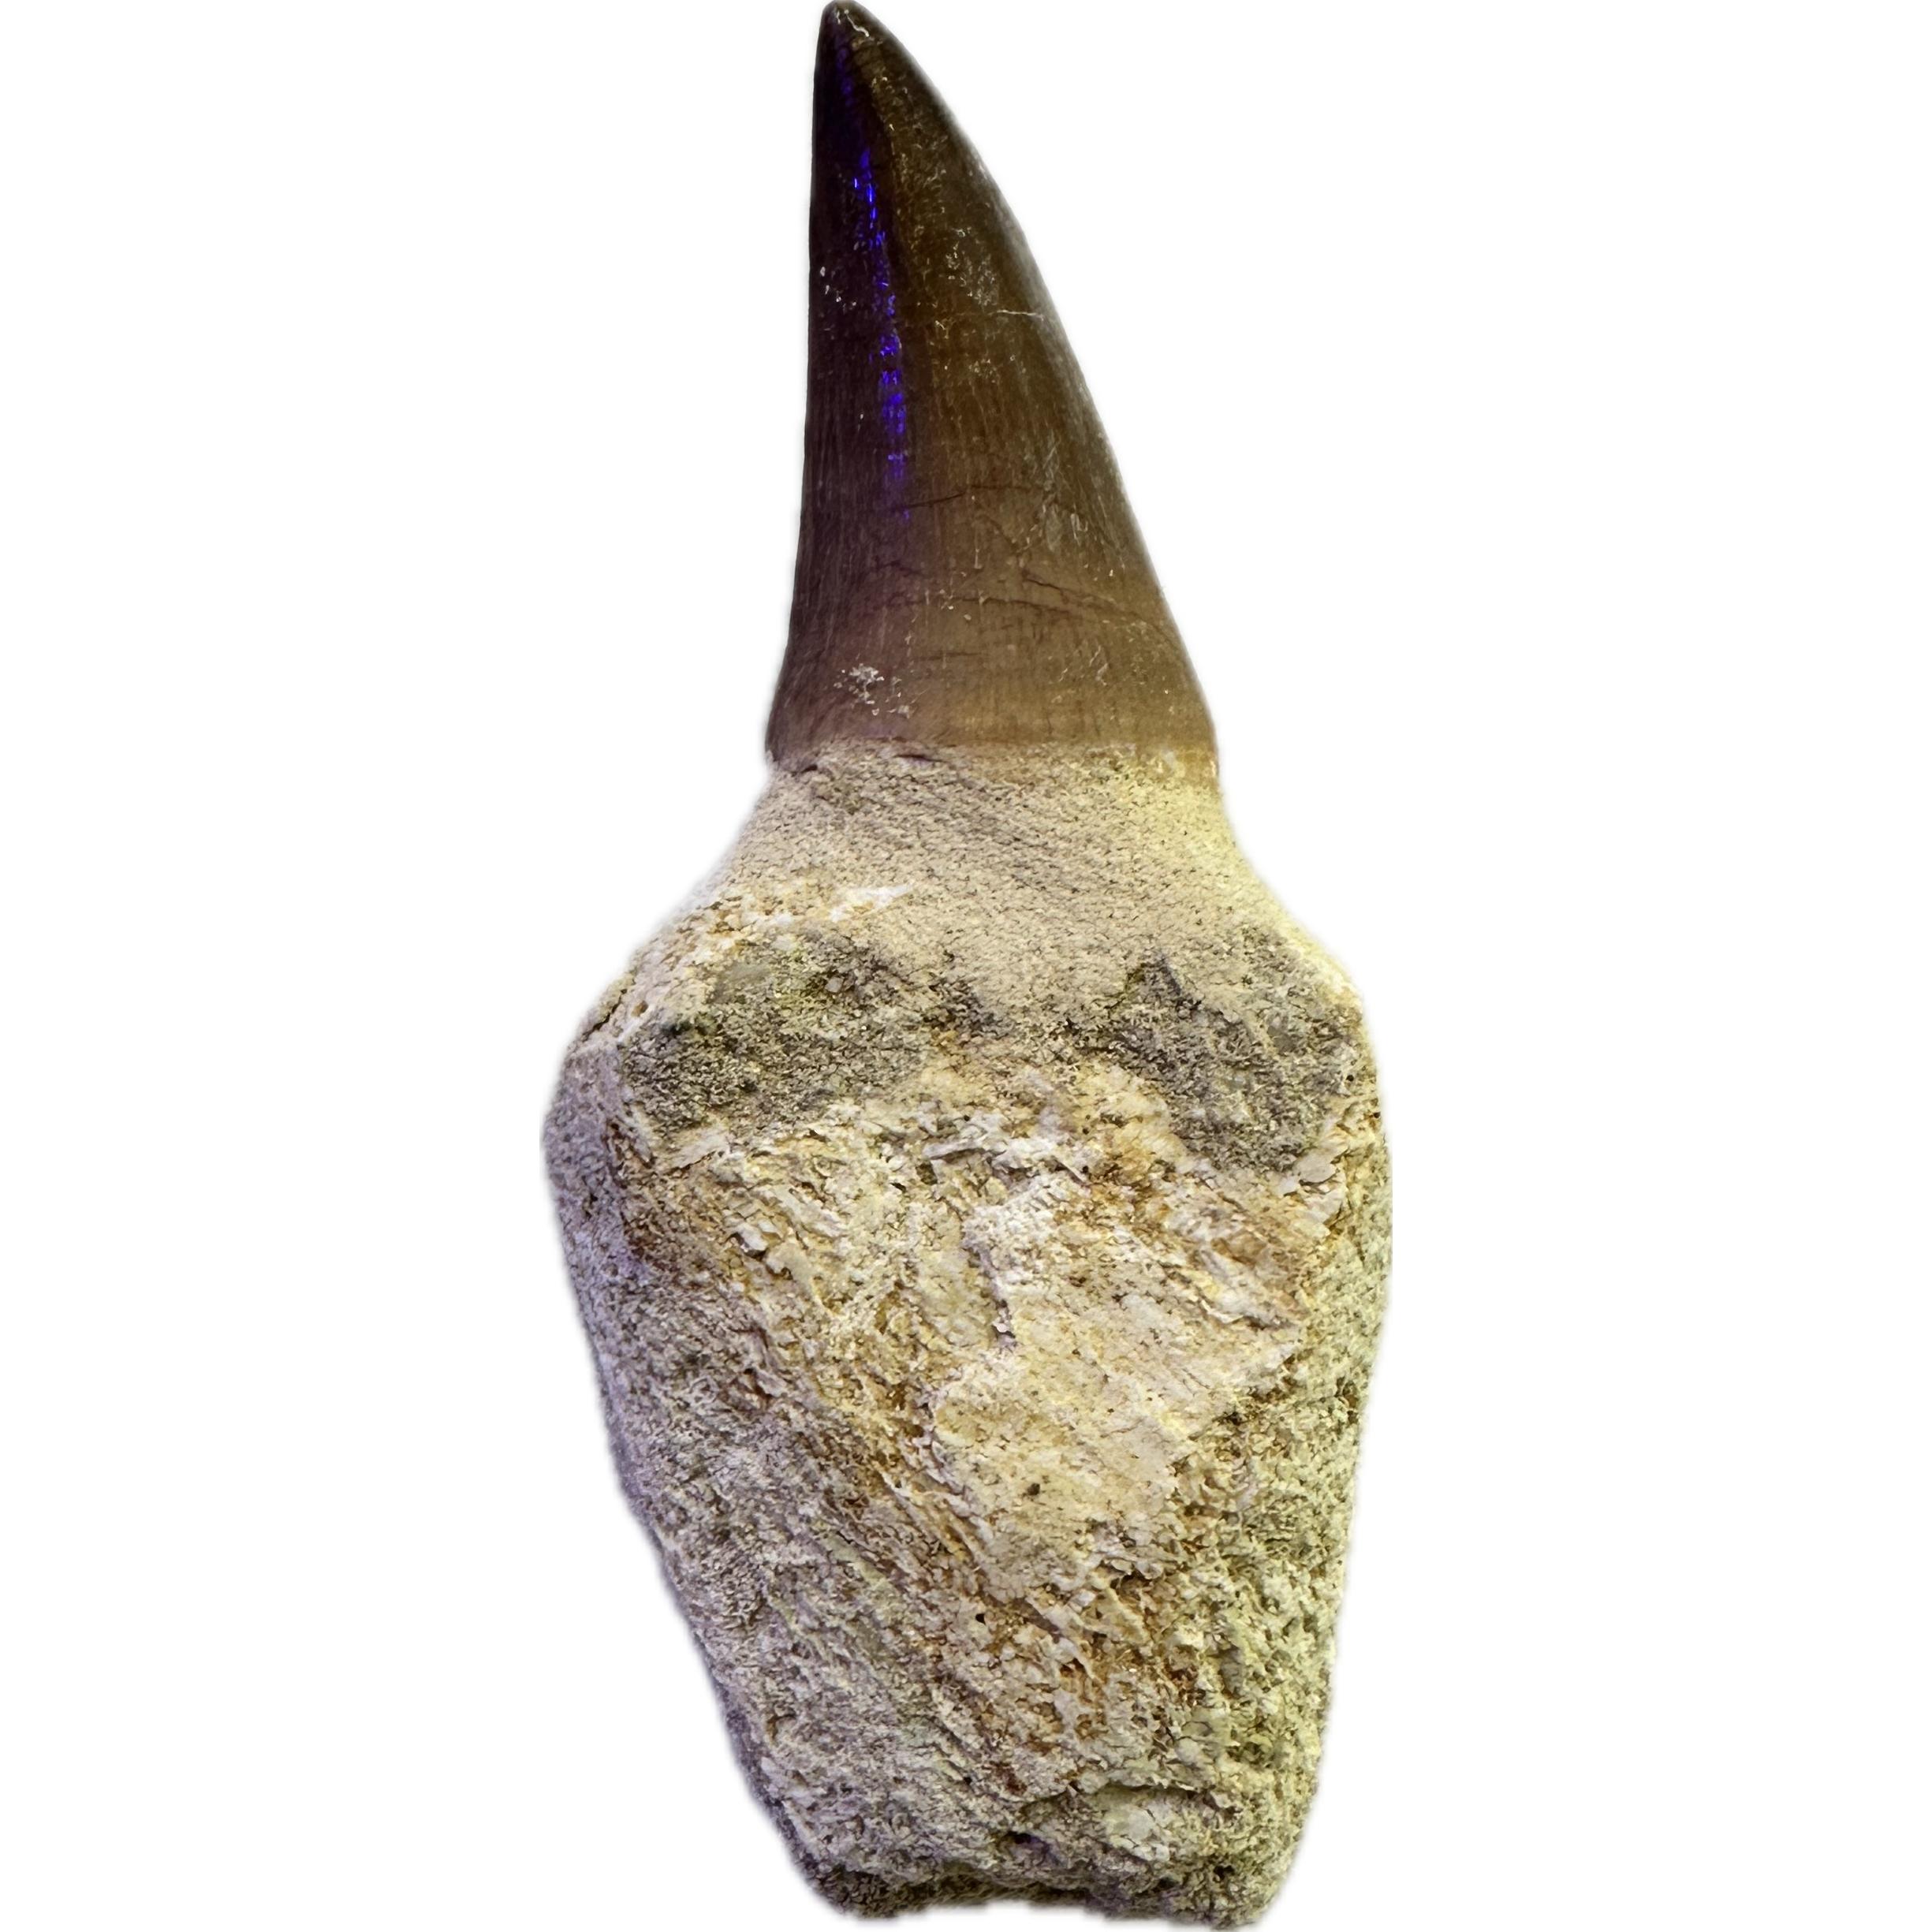 Mosasaurus tooth with root Prehistoric Online